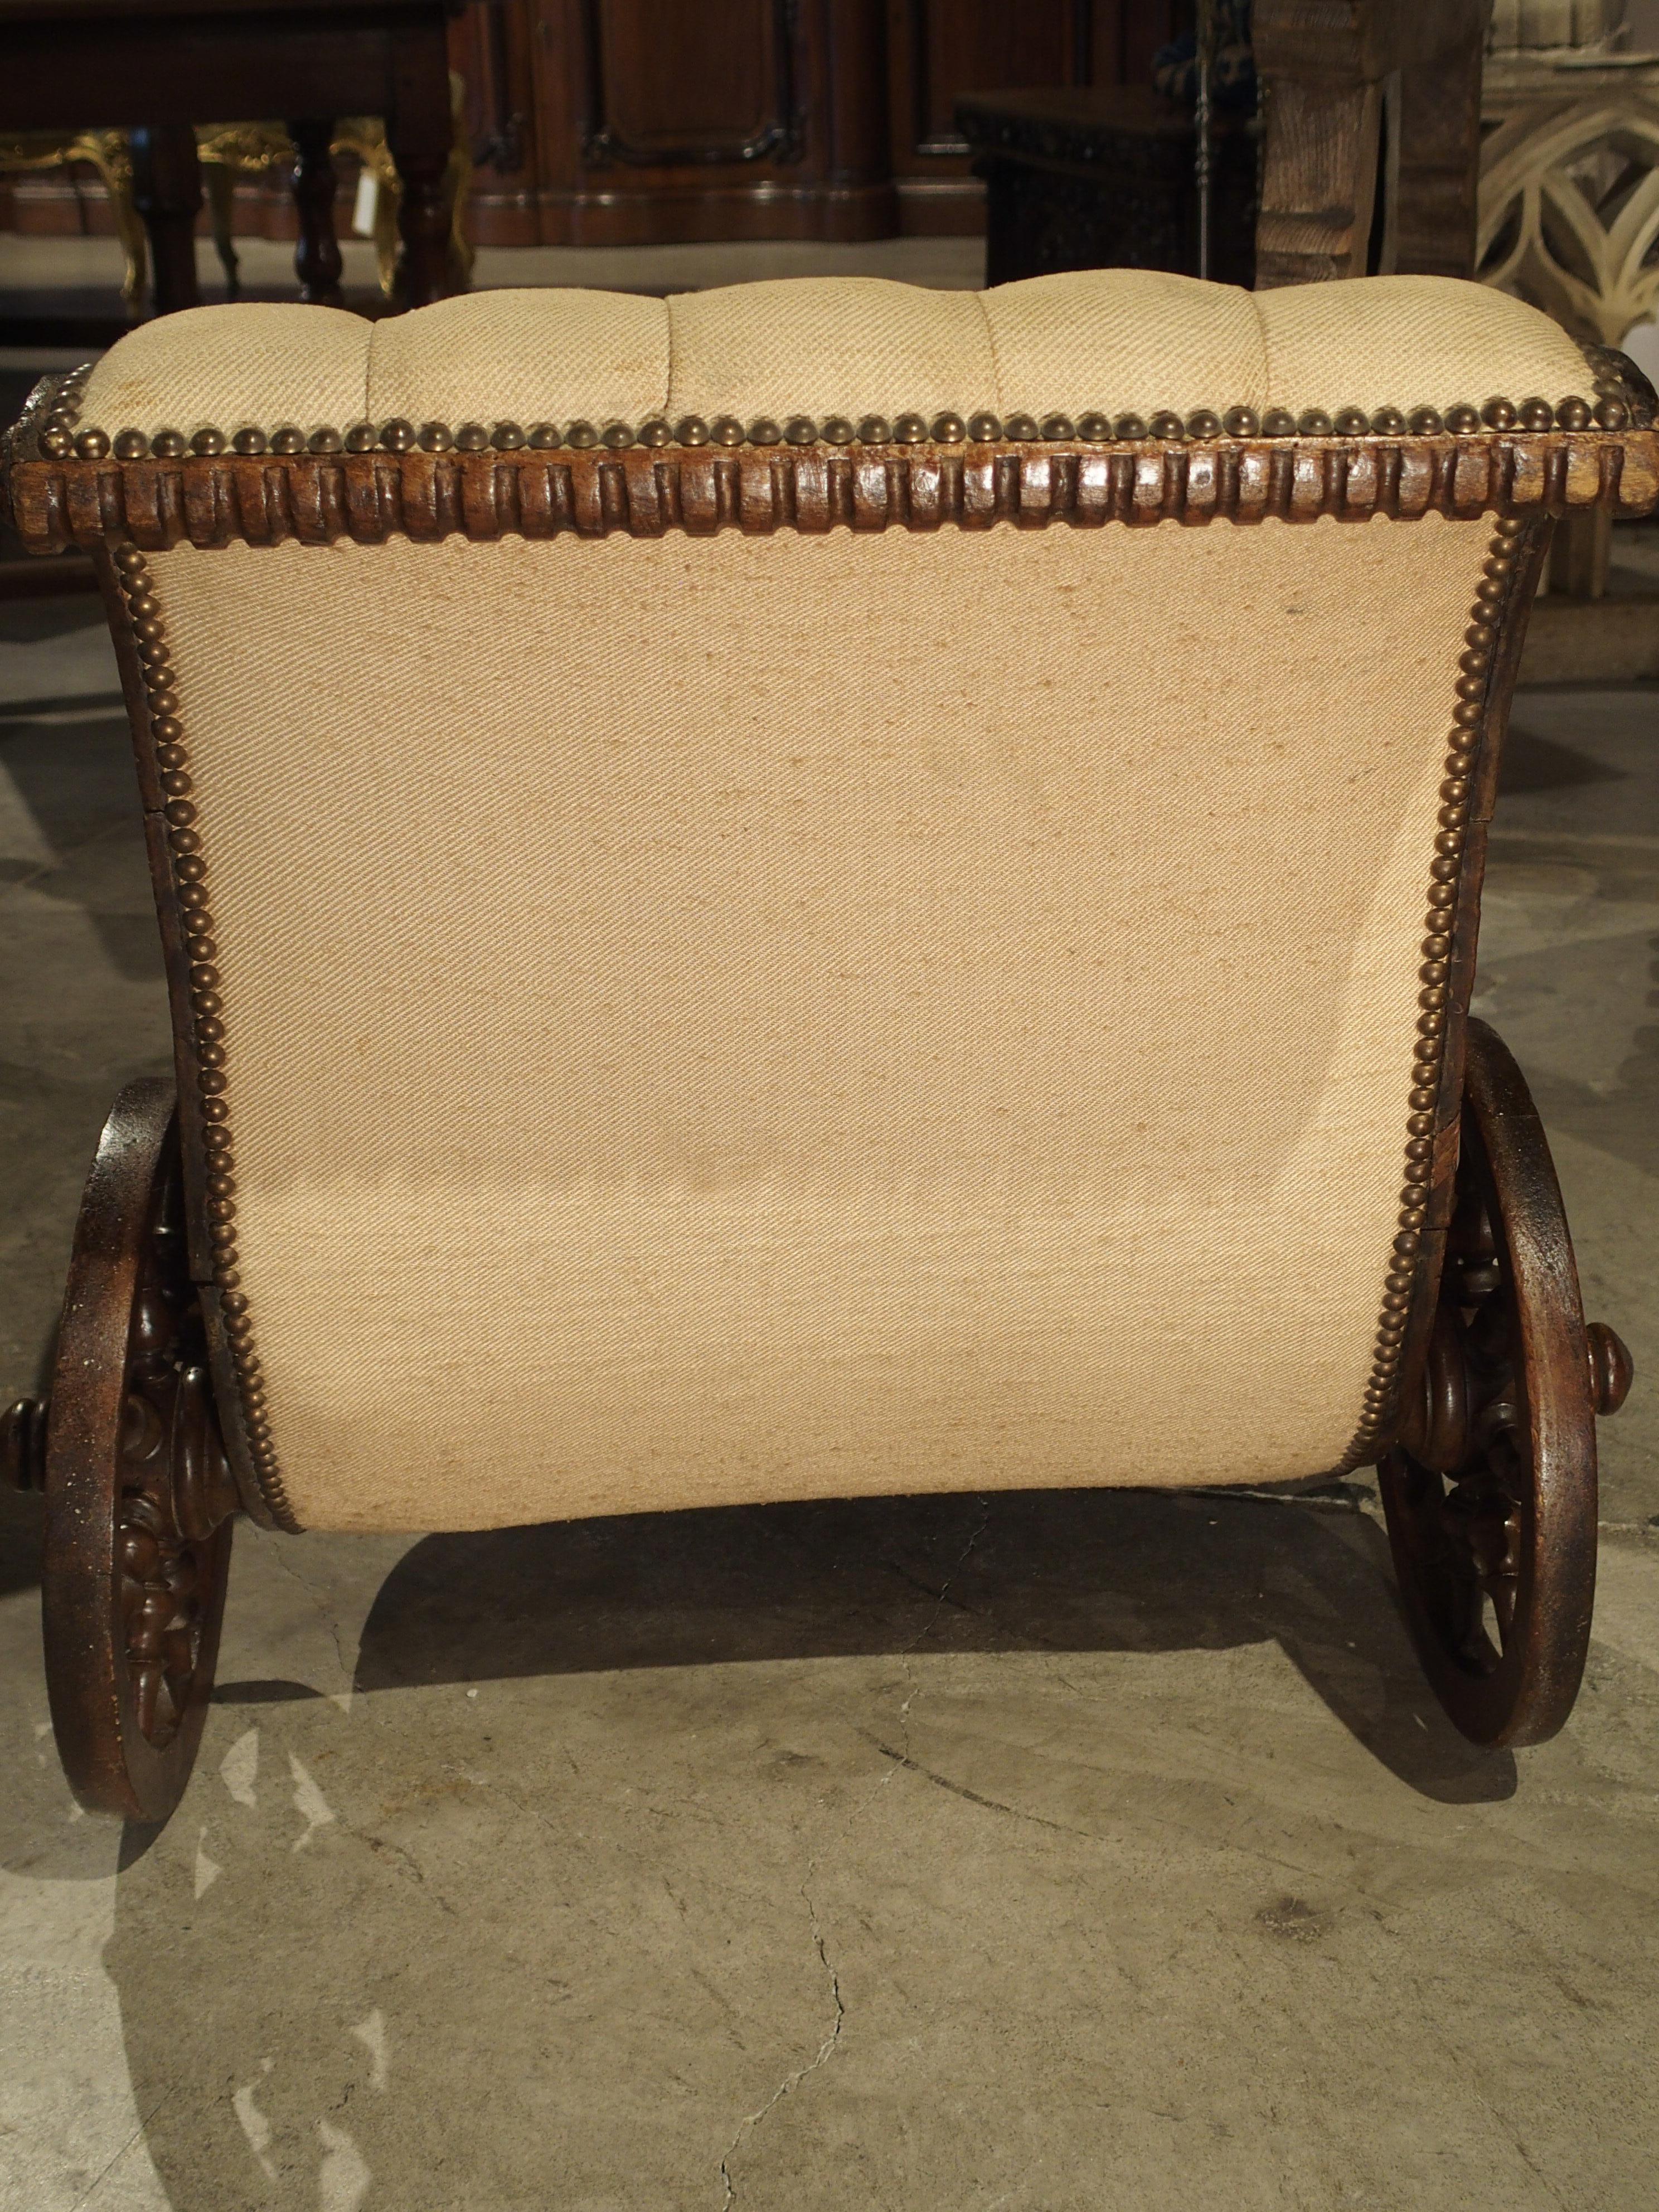 This charming antique wooden children’s carriage was made in the last half of the 1800s. It is a completely unique decorative piece and has been carved from walnut wood. It has tufted upholstery held in by brass nailheads, and the wooden rims,